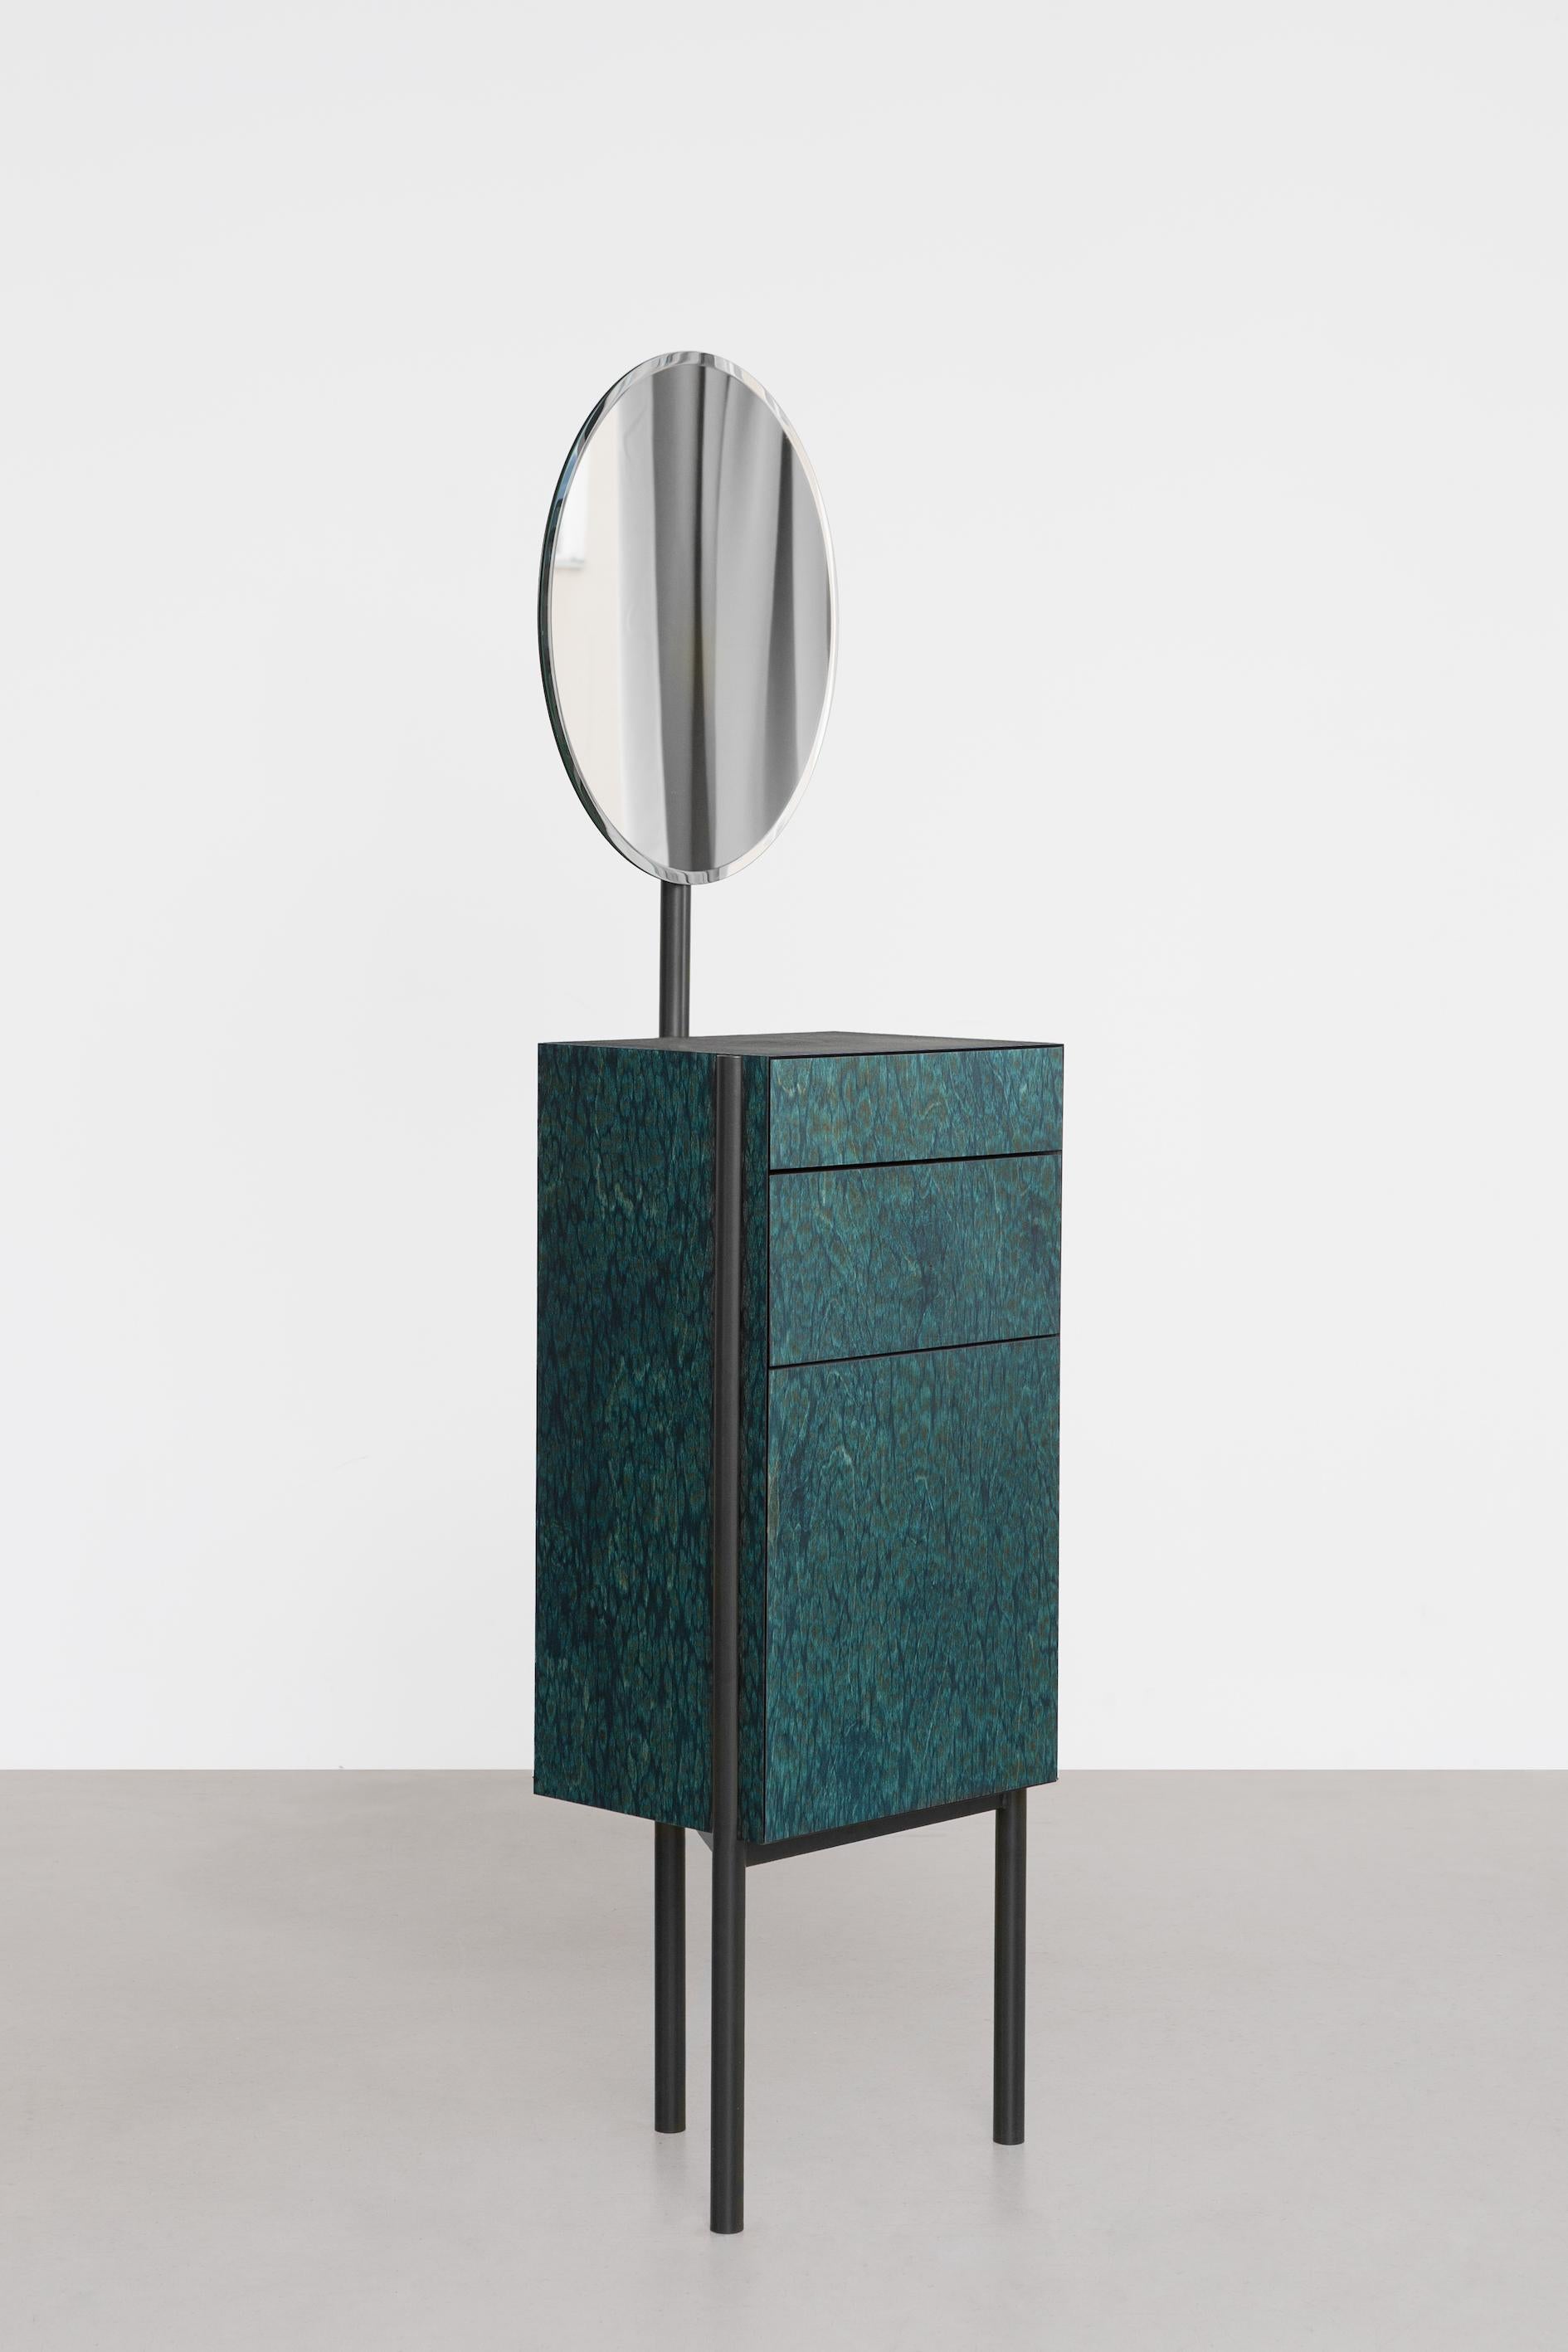 Osis Karla mirror / side table by Llot Llov
Dimensions: H 170 x W 43 x D 30 cm
Materials: birch
Finishing: lacquered / powder-coated steel

KARLA s a piece of furniture that is as lovely as its task. It functions as a dressing and make-up